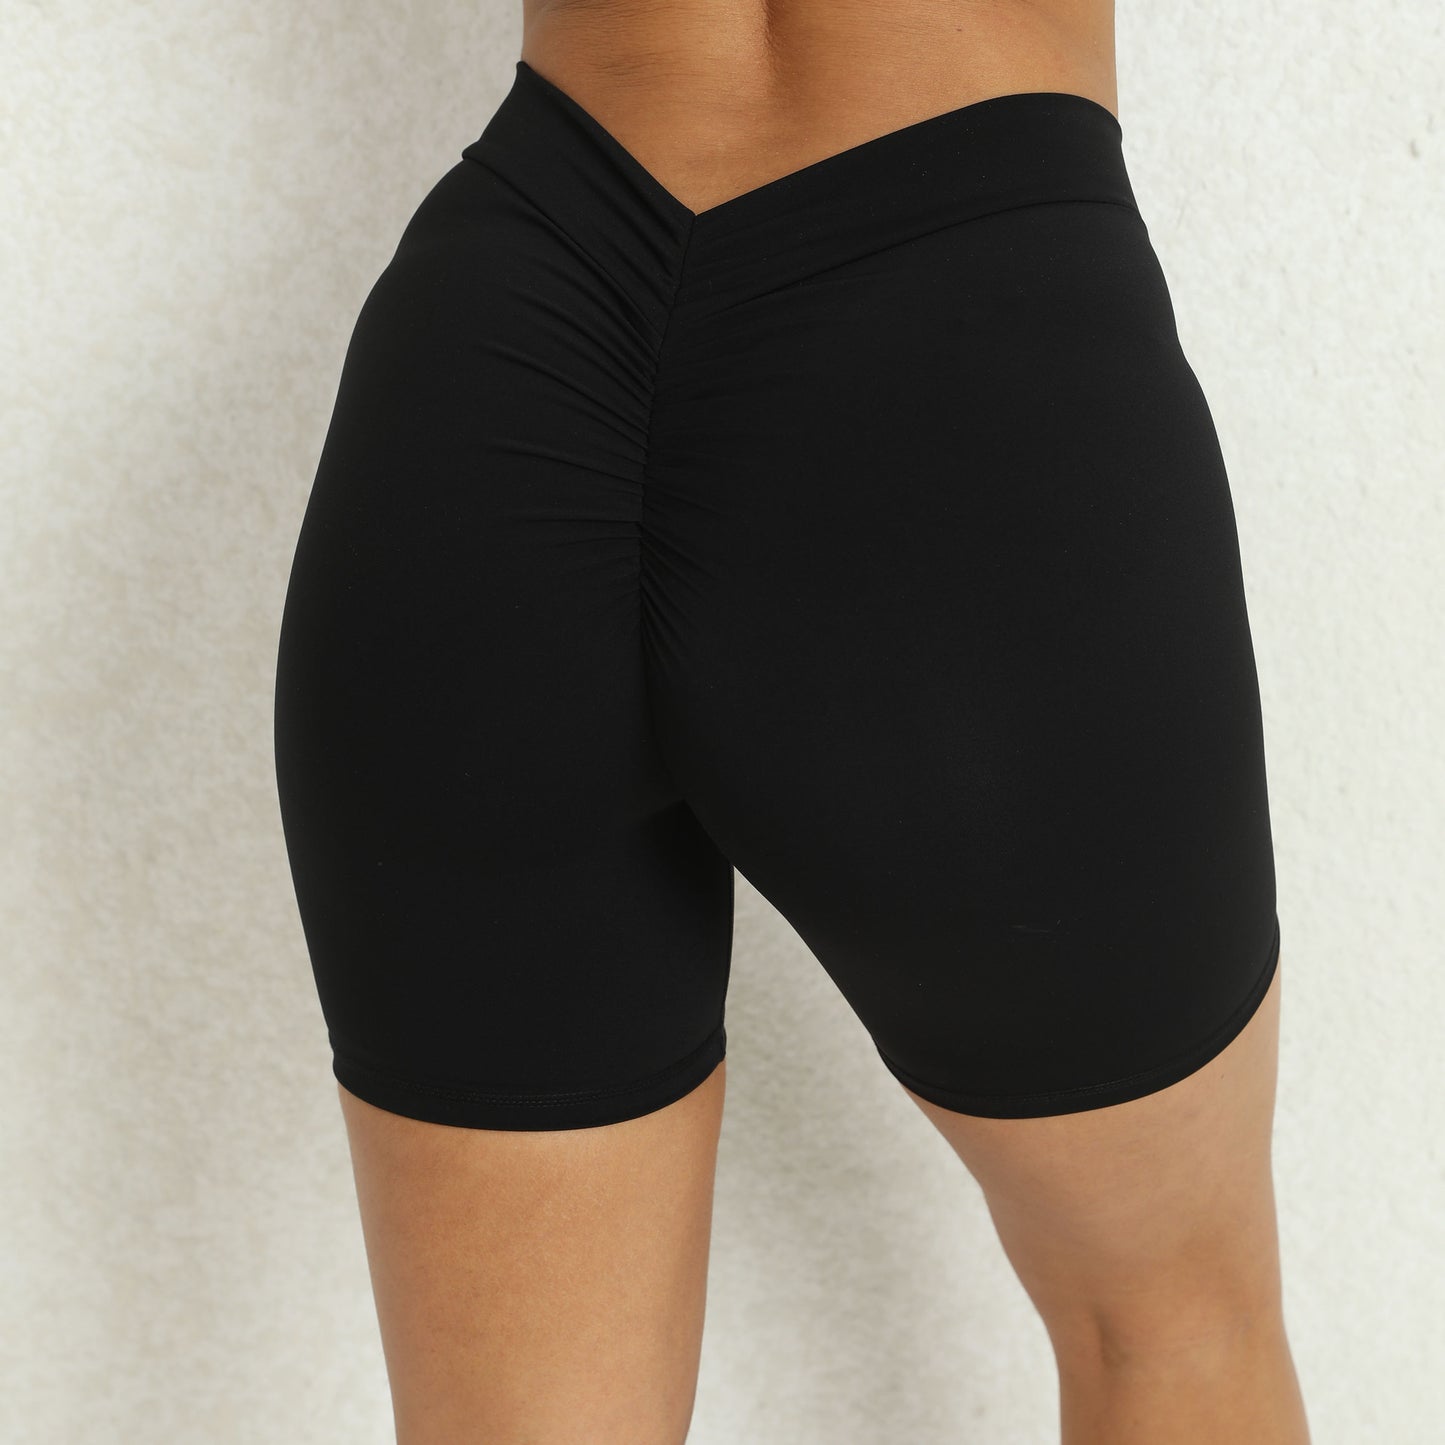 Back Waist Deep V-shaped Wrinkle Tight Hip Yoga Shorts New Style No Embarrassment Line Peach Hip Fitness Shorts 15 Colors